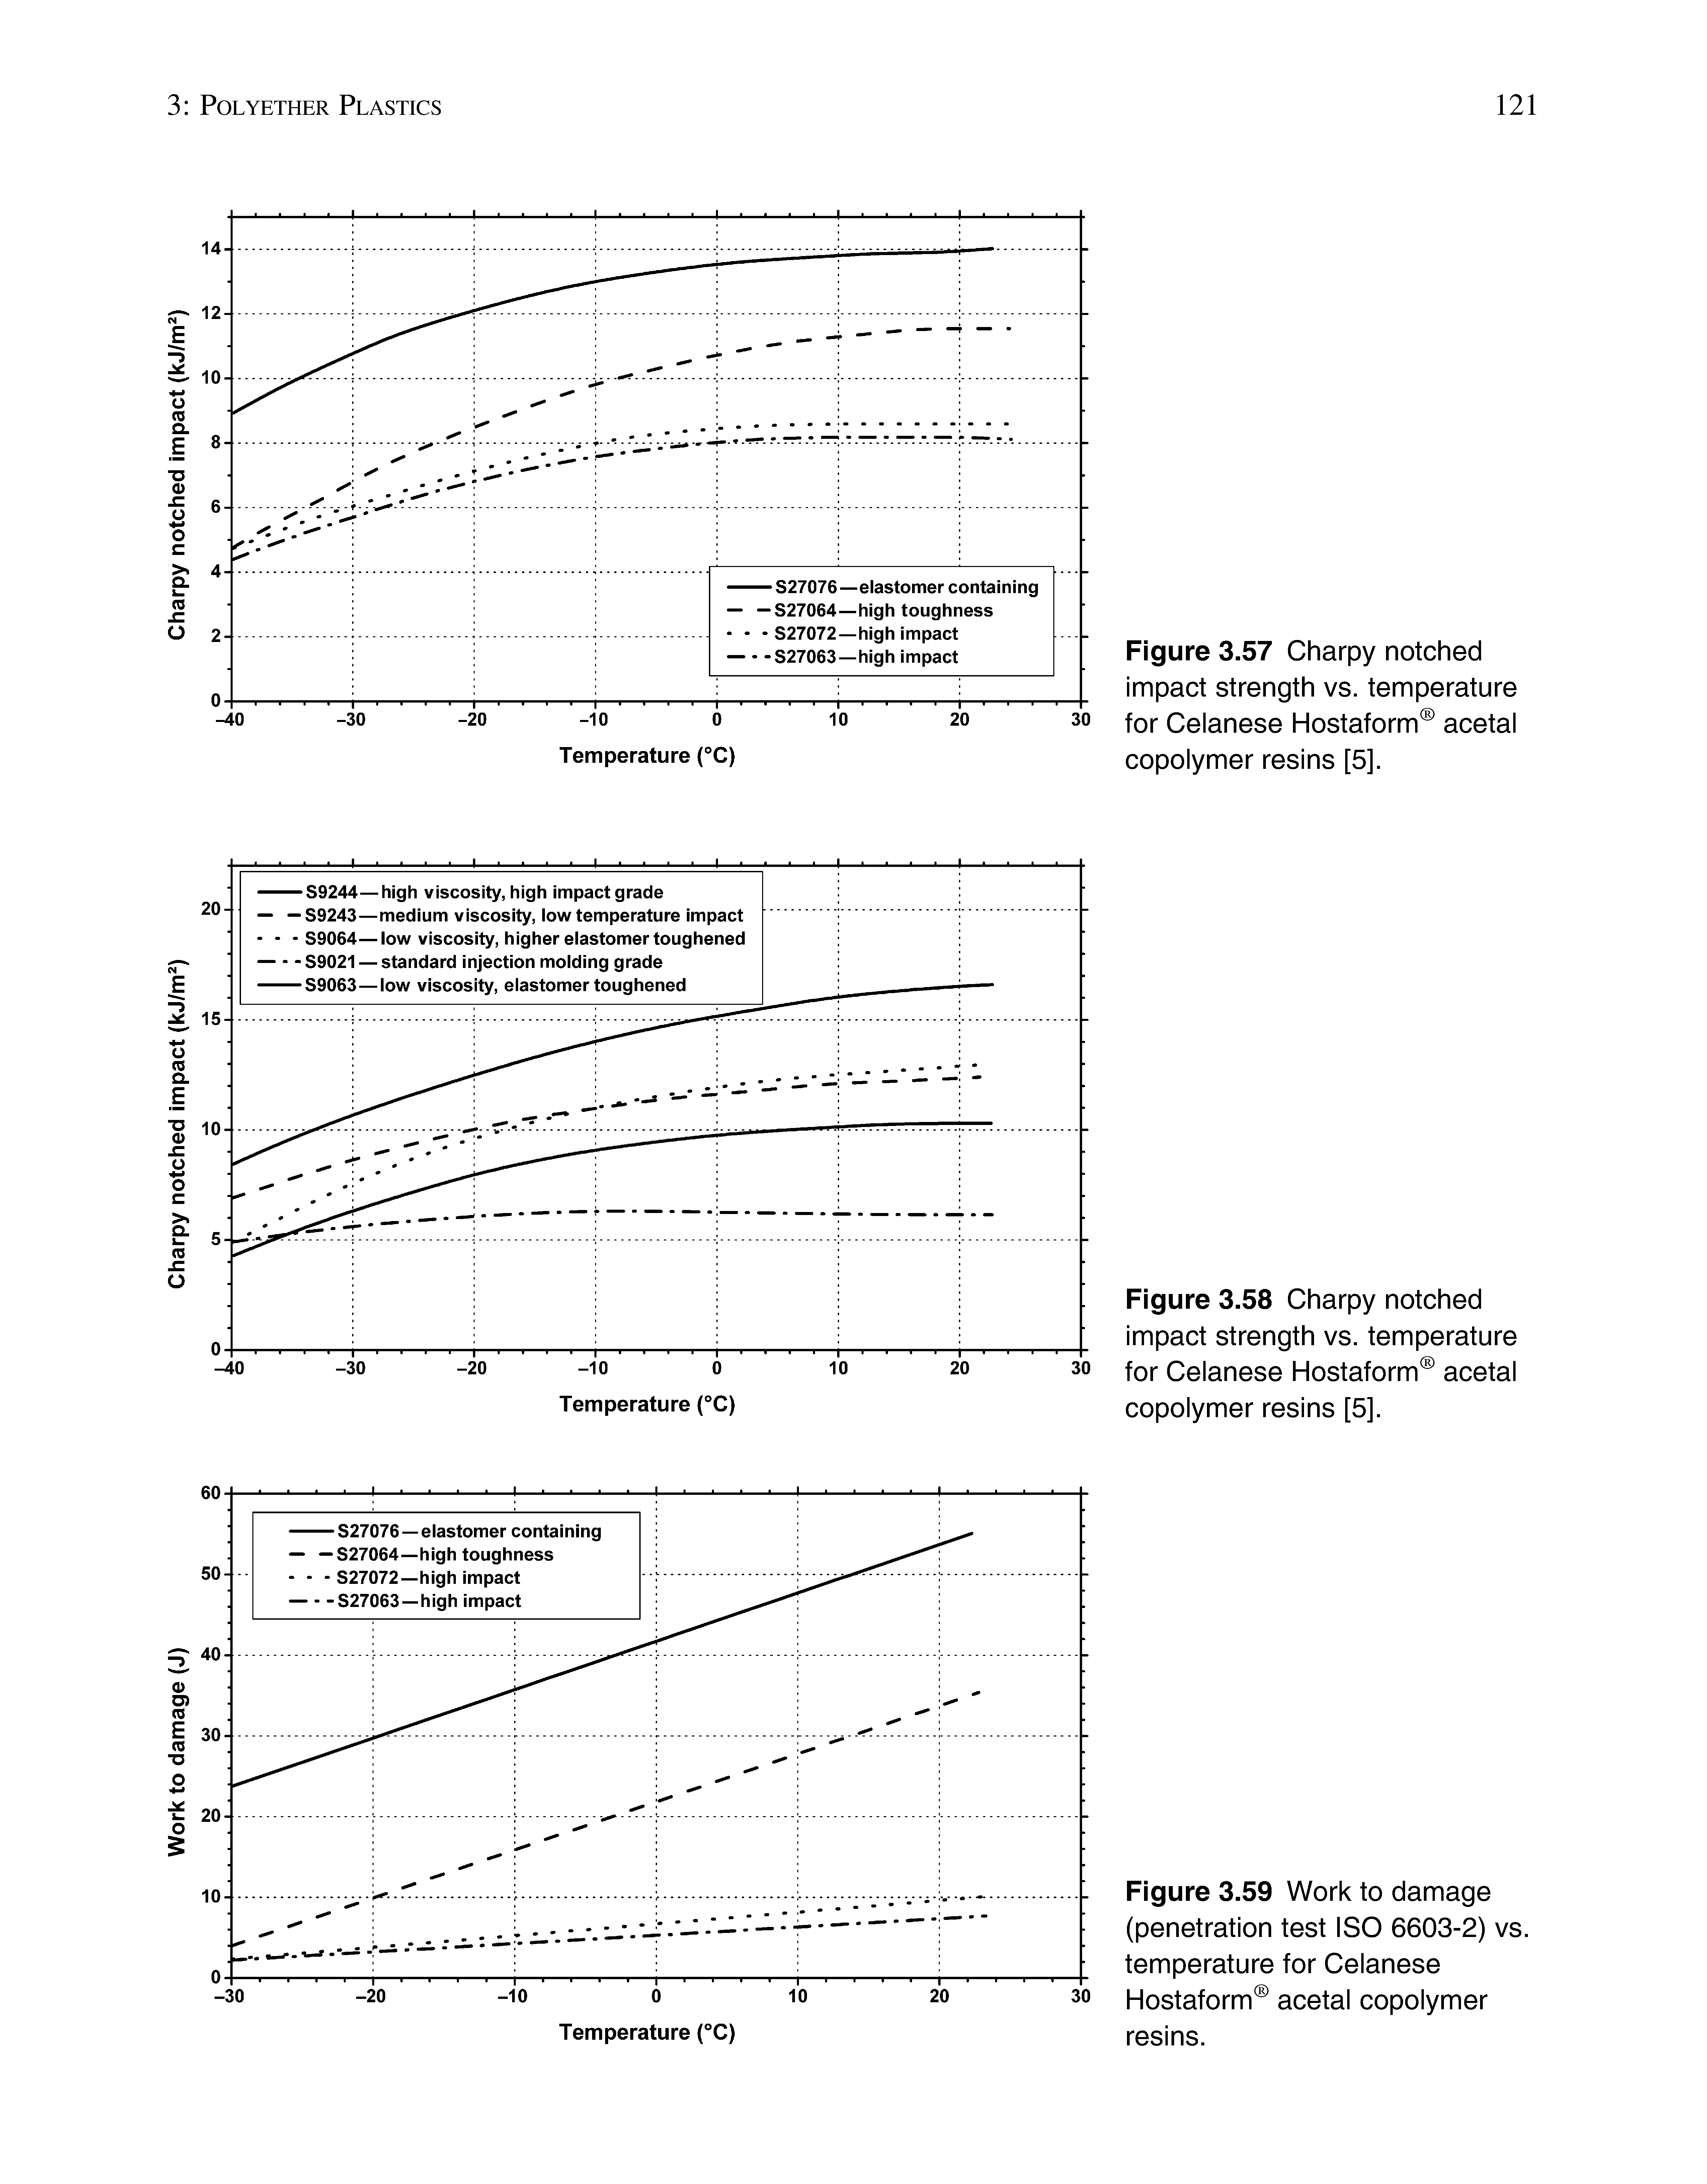 Figure 3.57 Charpy notched impact strength vs. temperature for Celanese Hostaform acetal copolymer resins [5].